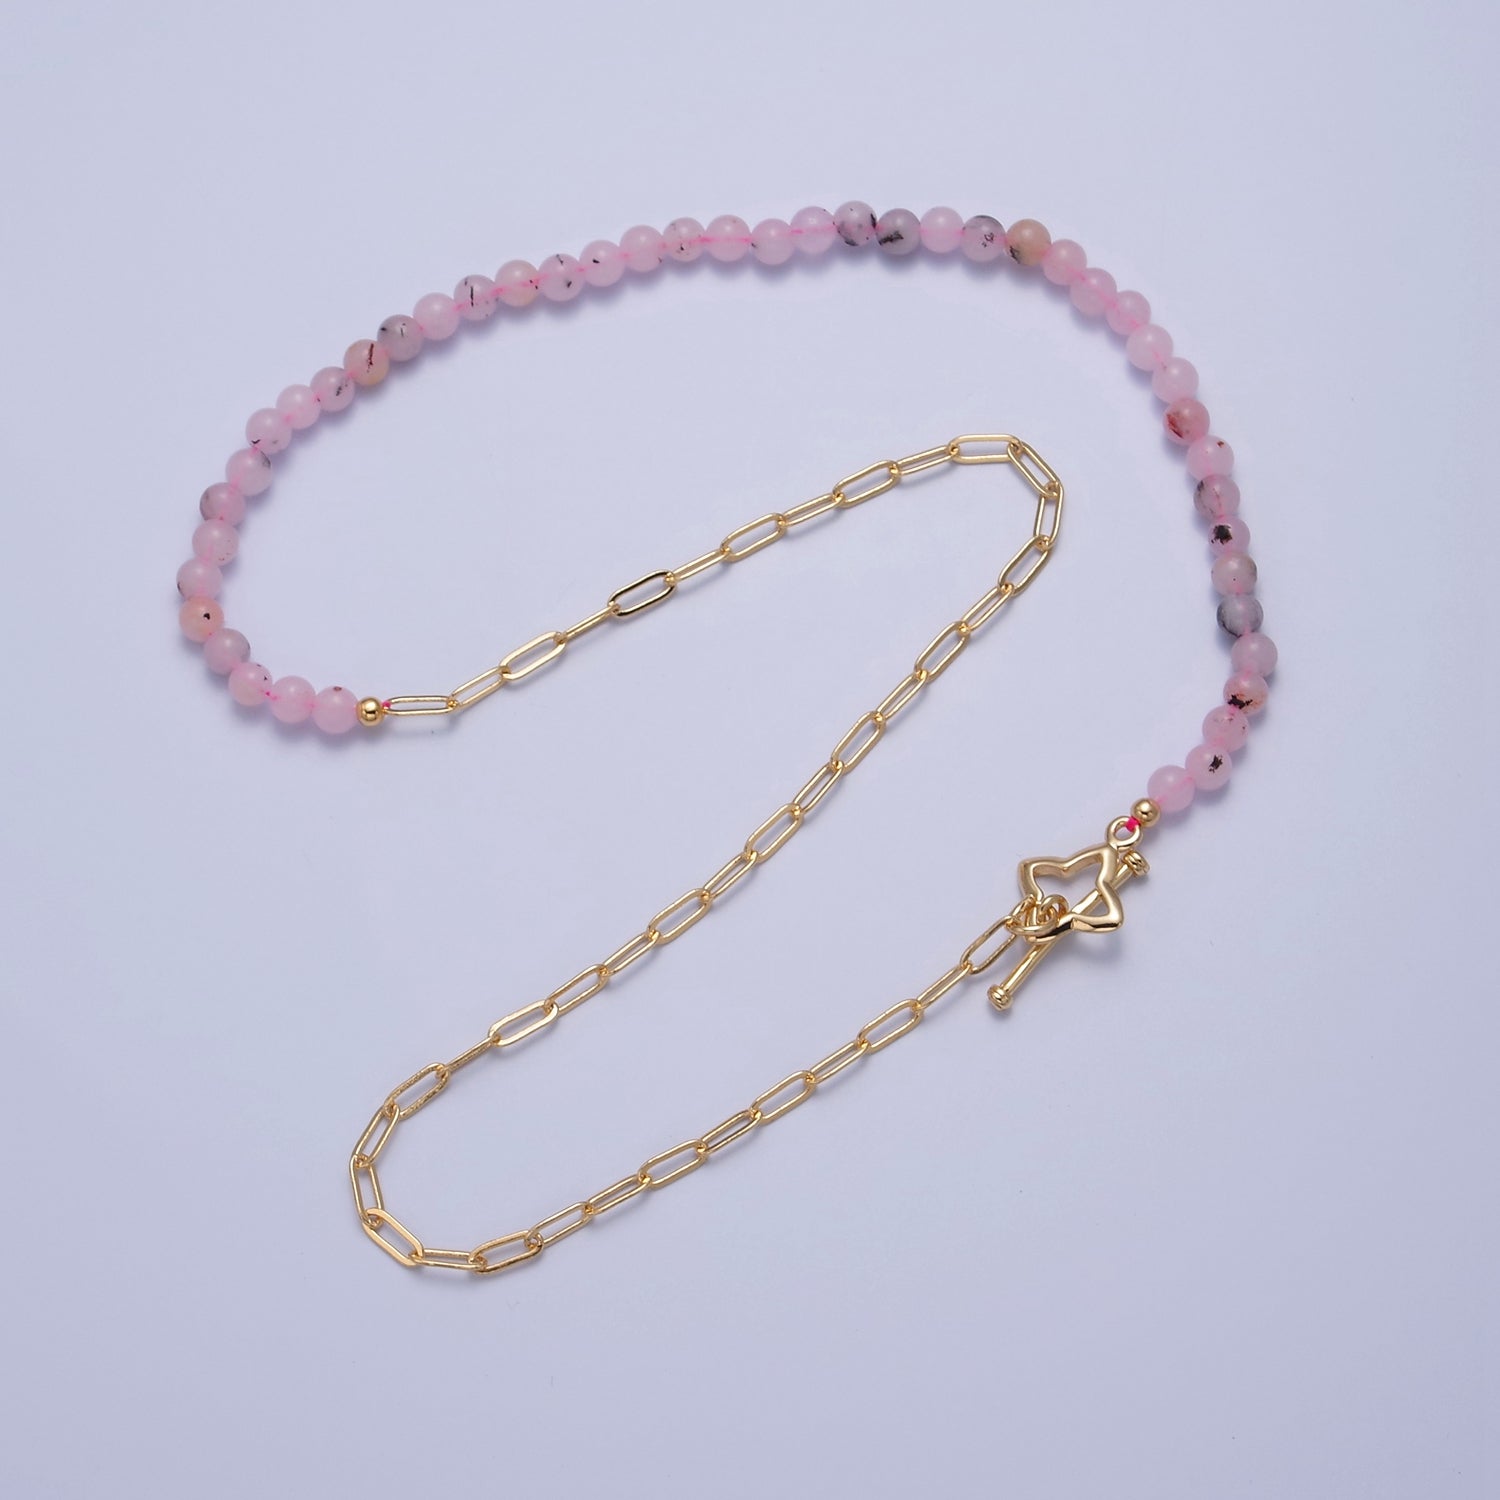 Dainty Half Bead Half Link Chain Necklace, 24k Gold Filled Paperclip Chain with Pink Jade Necklace Toggle Clasp WA-972 - DLUXCA